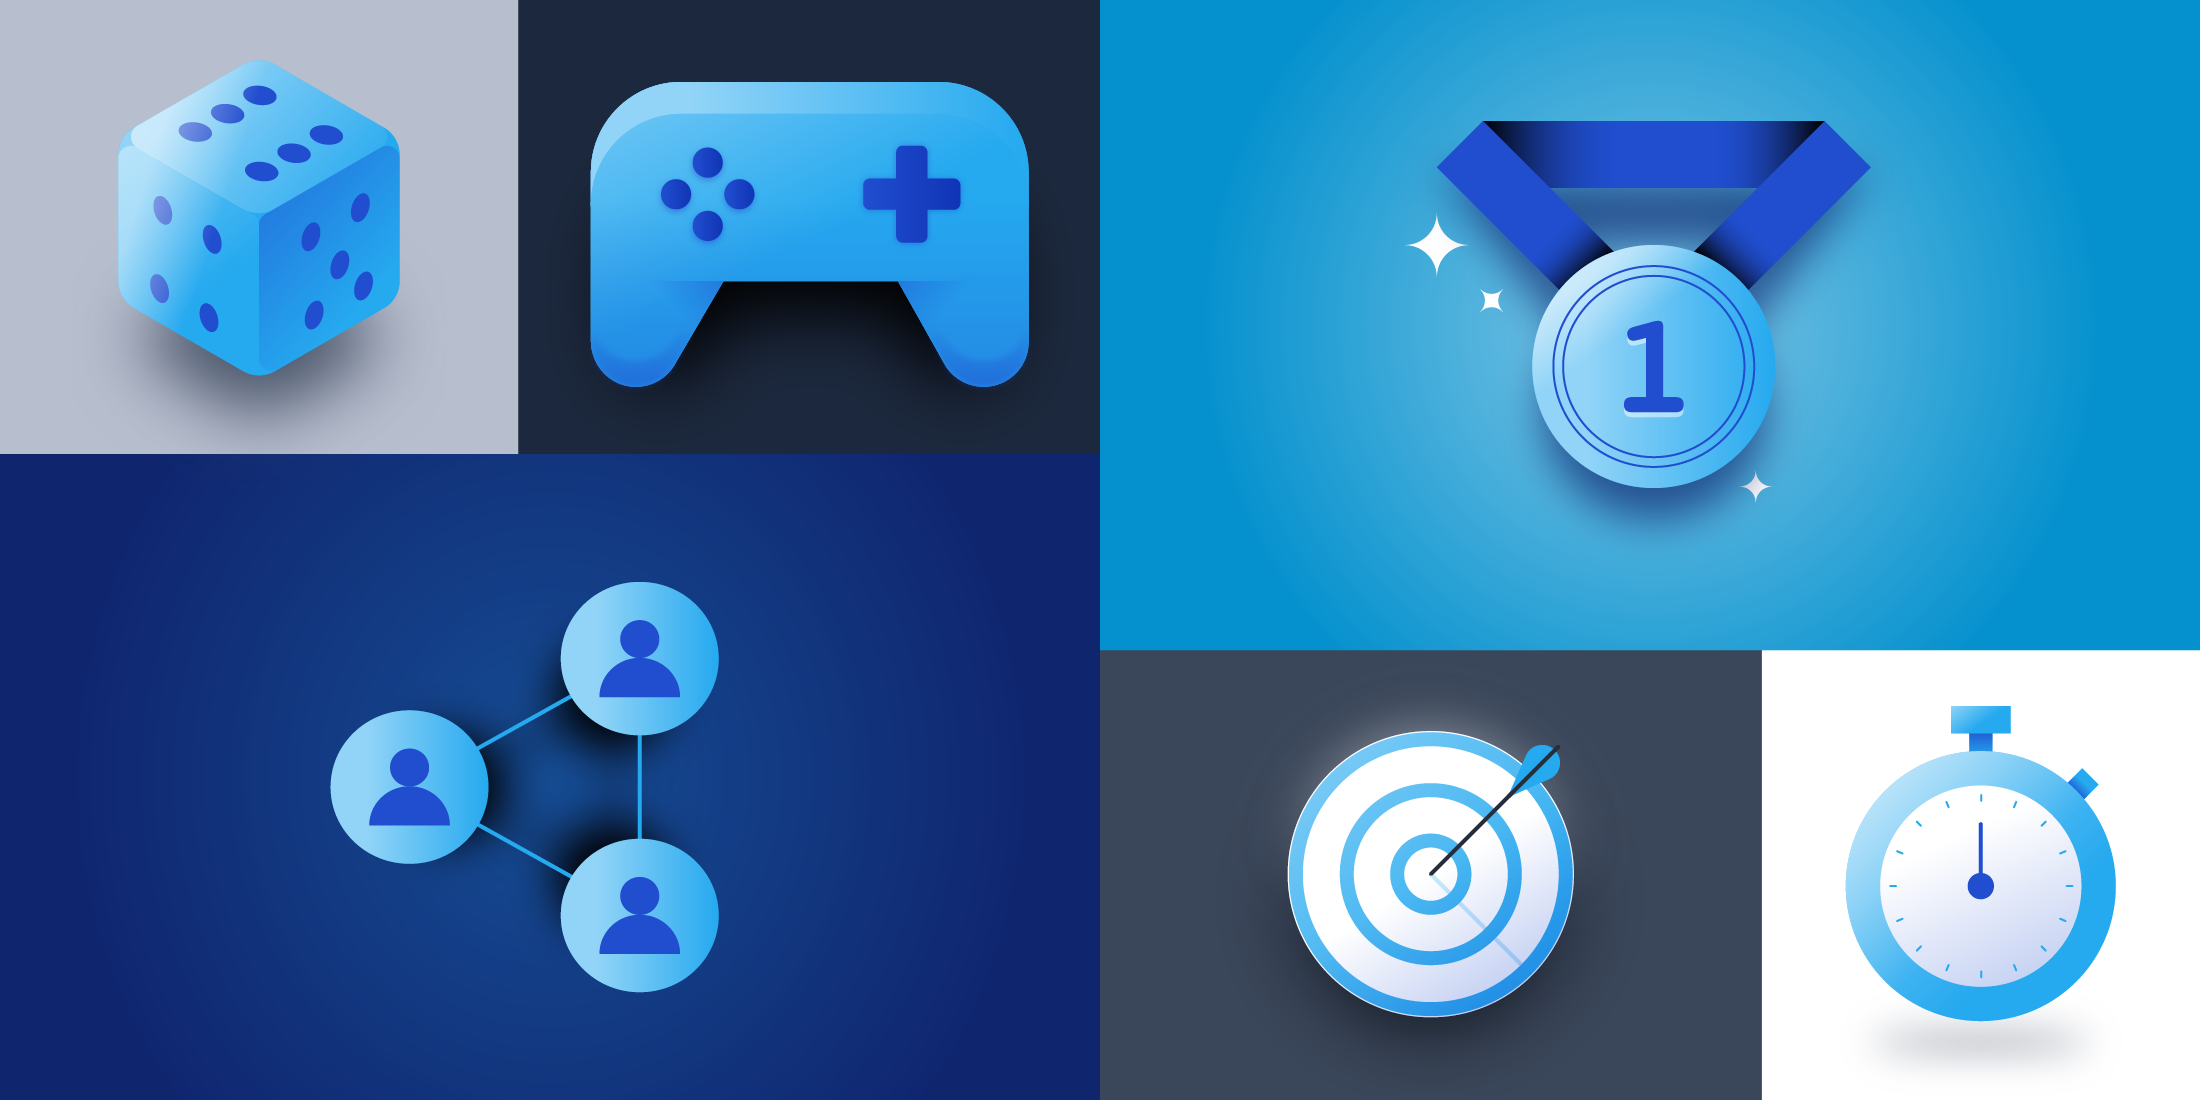 How Product Designers Can Use Gamification for Good